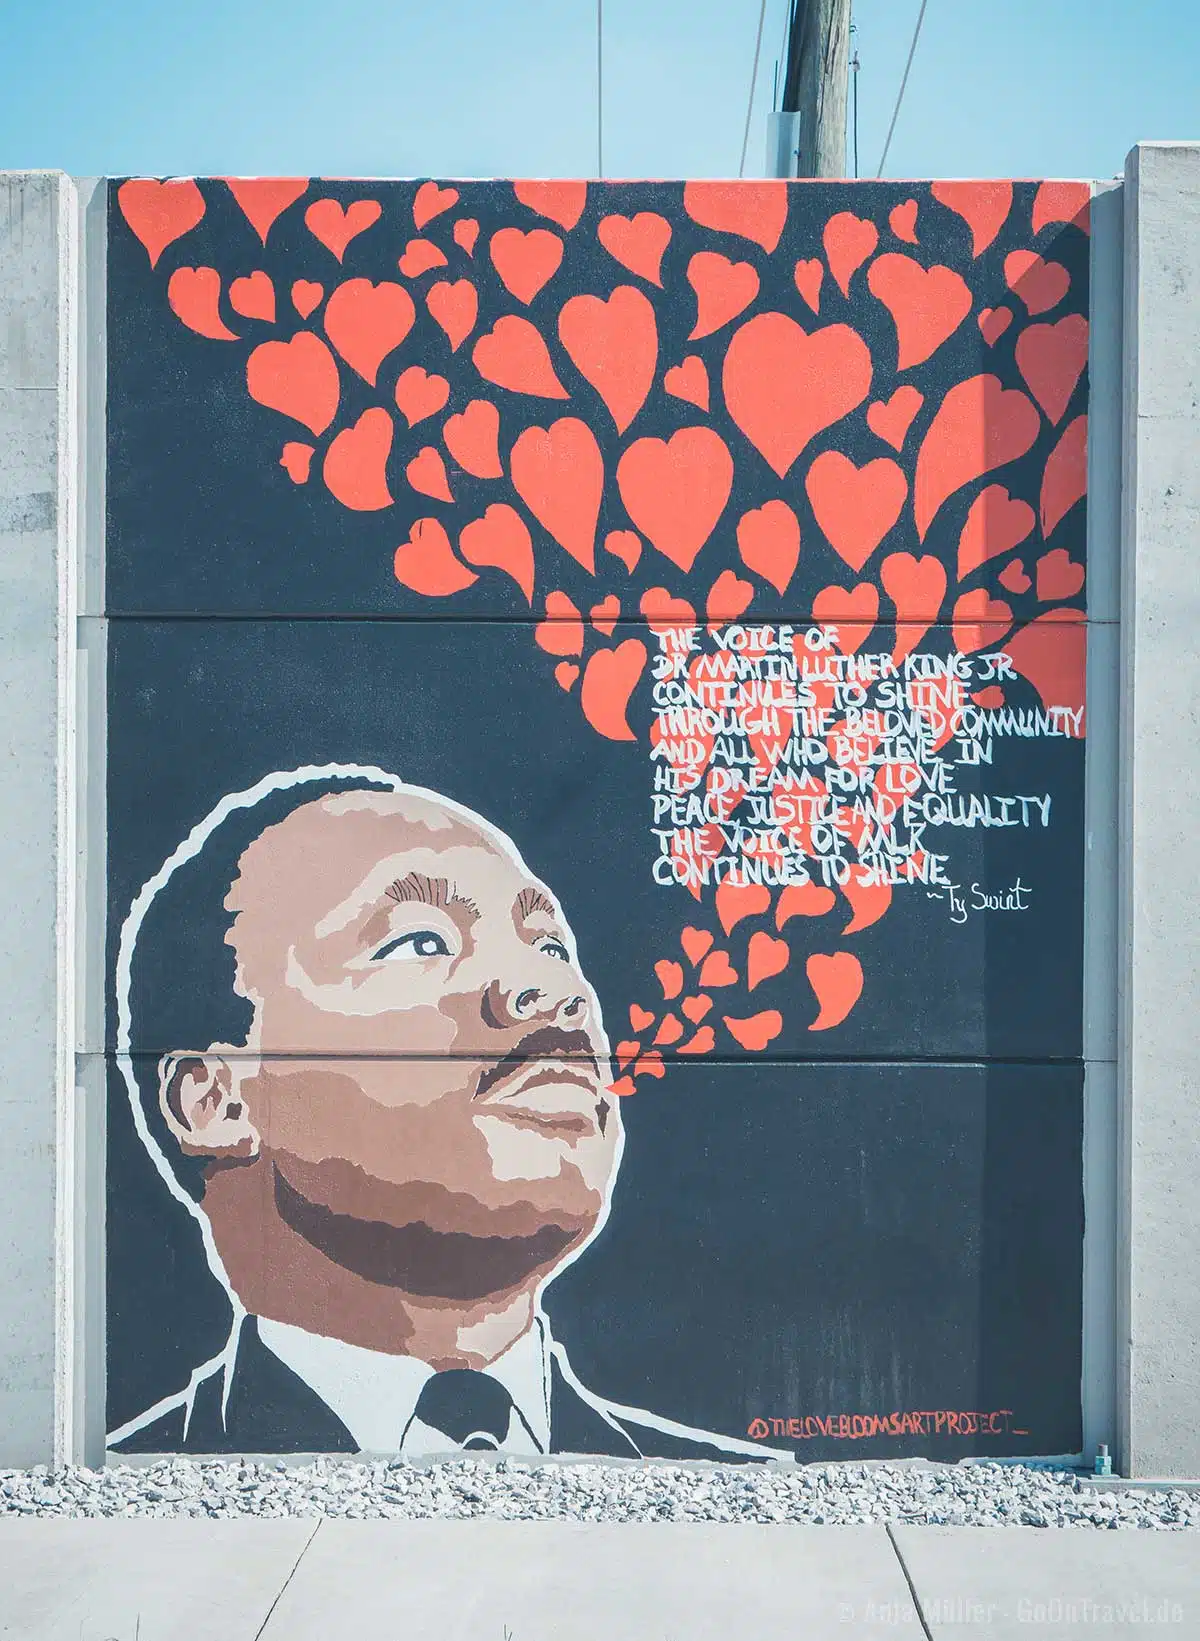 Mural von Martin Luther King in Chattanooga 